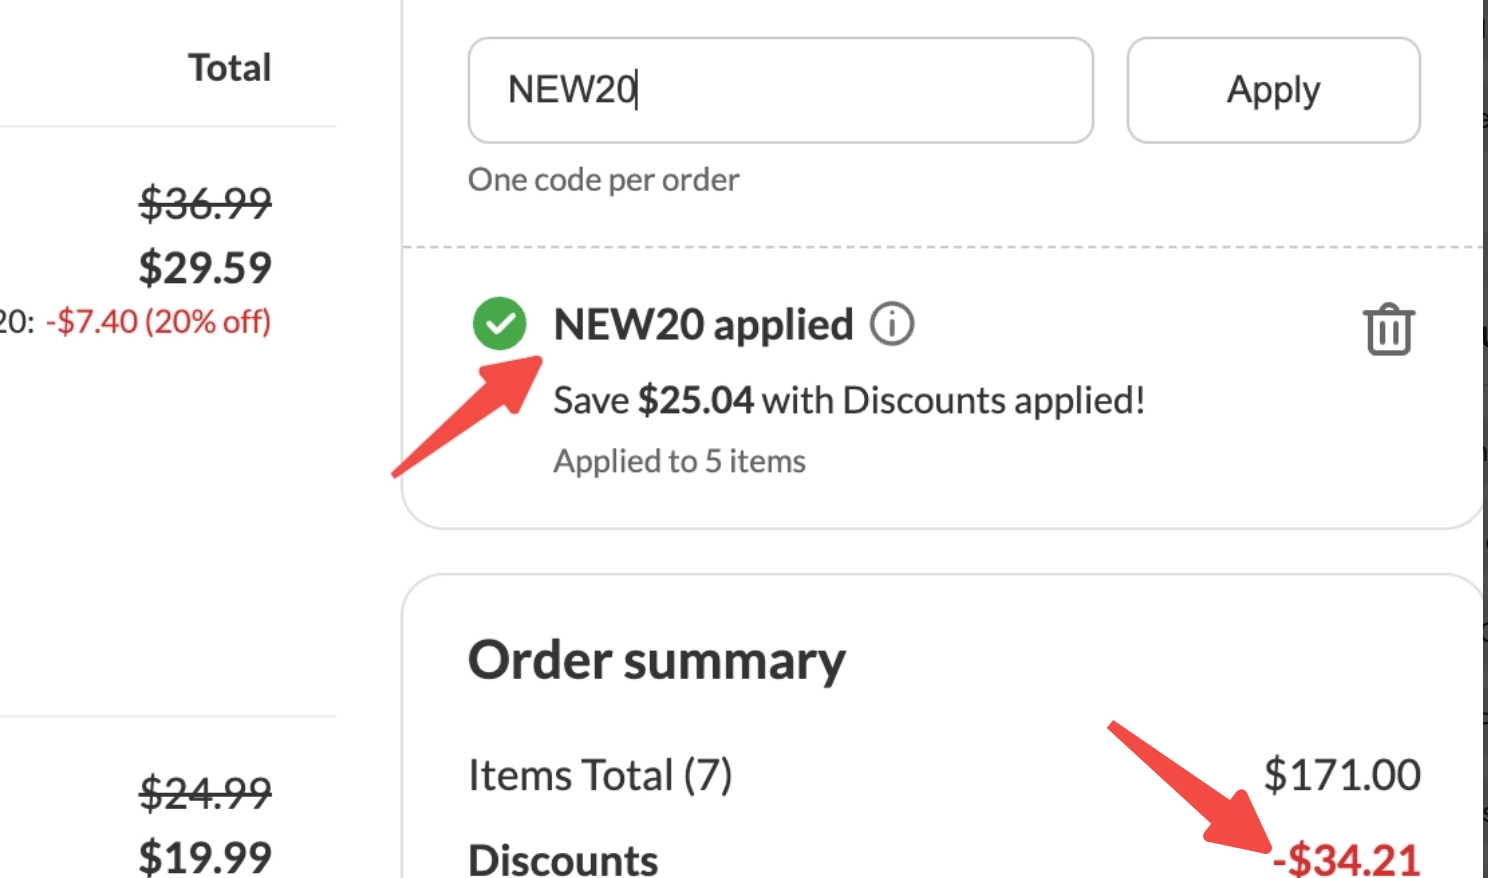 Step 4: Once you click Apply, you will see the discounted price reflecting the deducted amount.